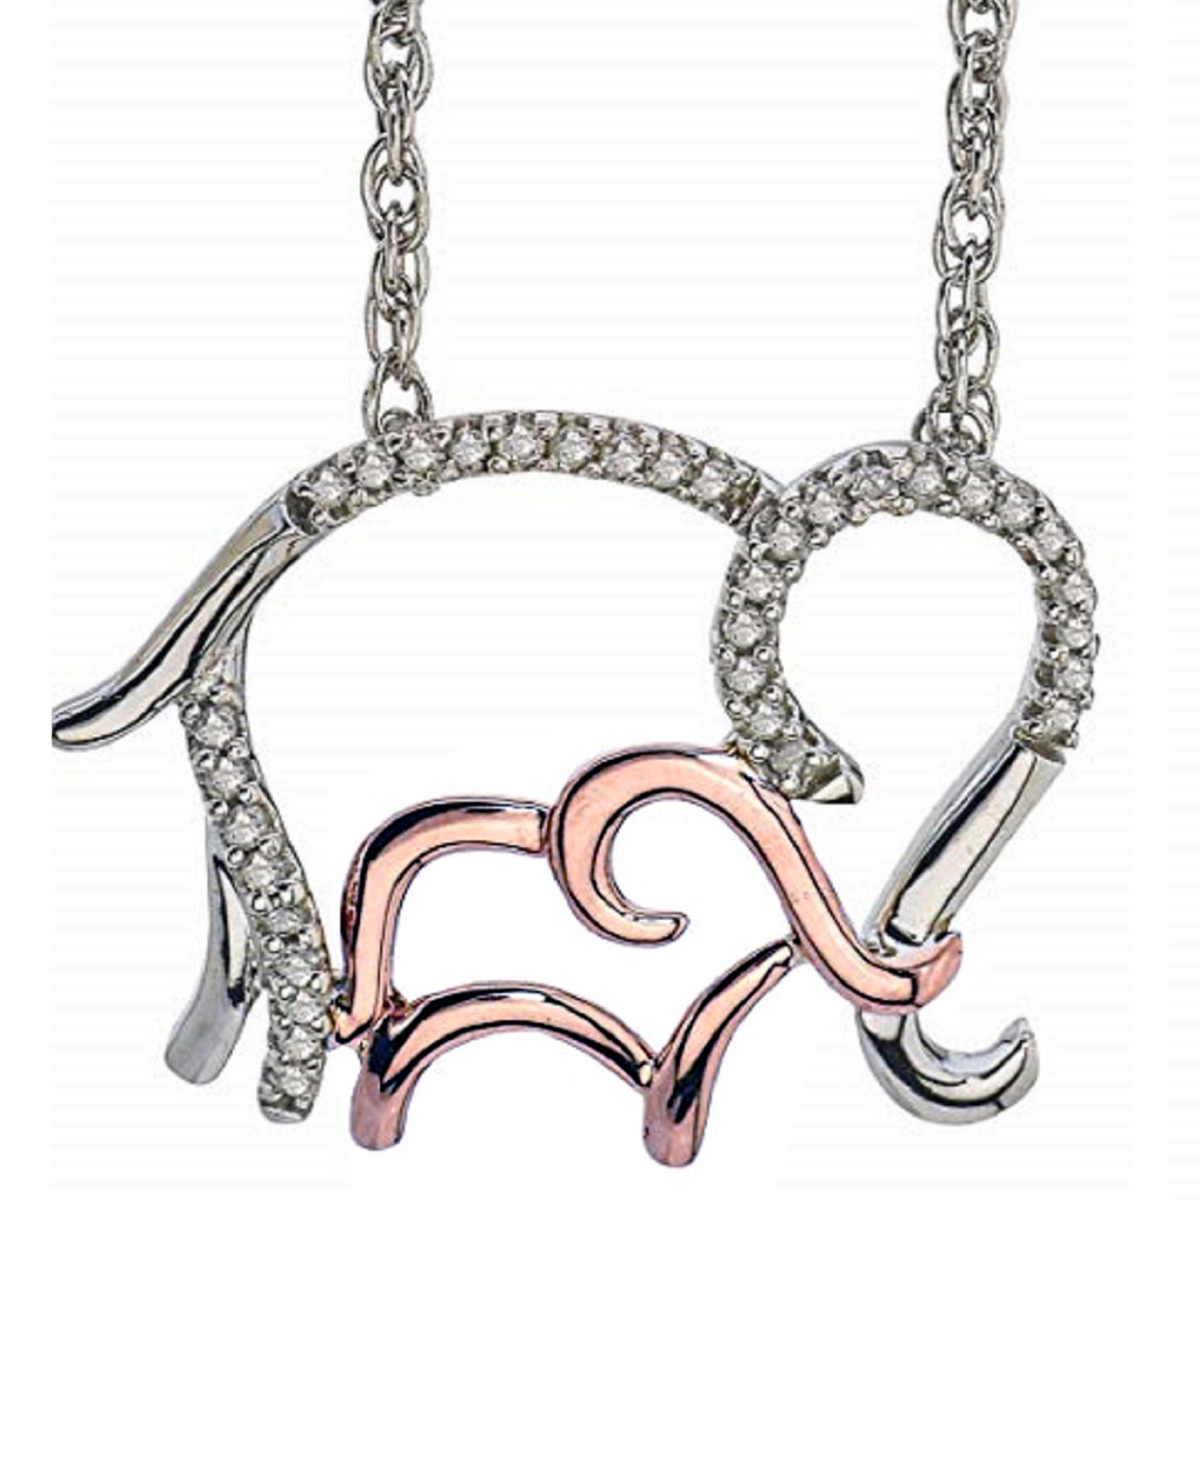 Diamond Family Elephant Pendant Necklace (1/10 ct. t.w.) in Sterling Silver and 10k Rose Gold - Two-Tone